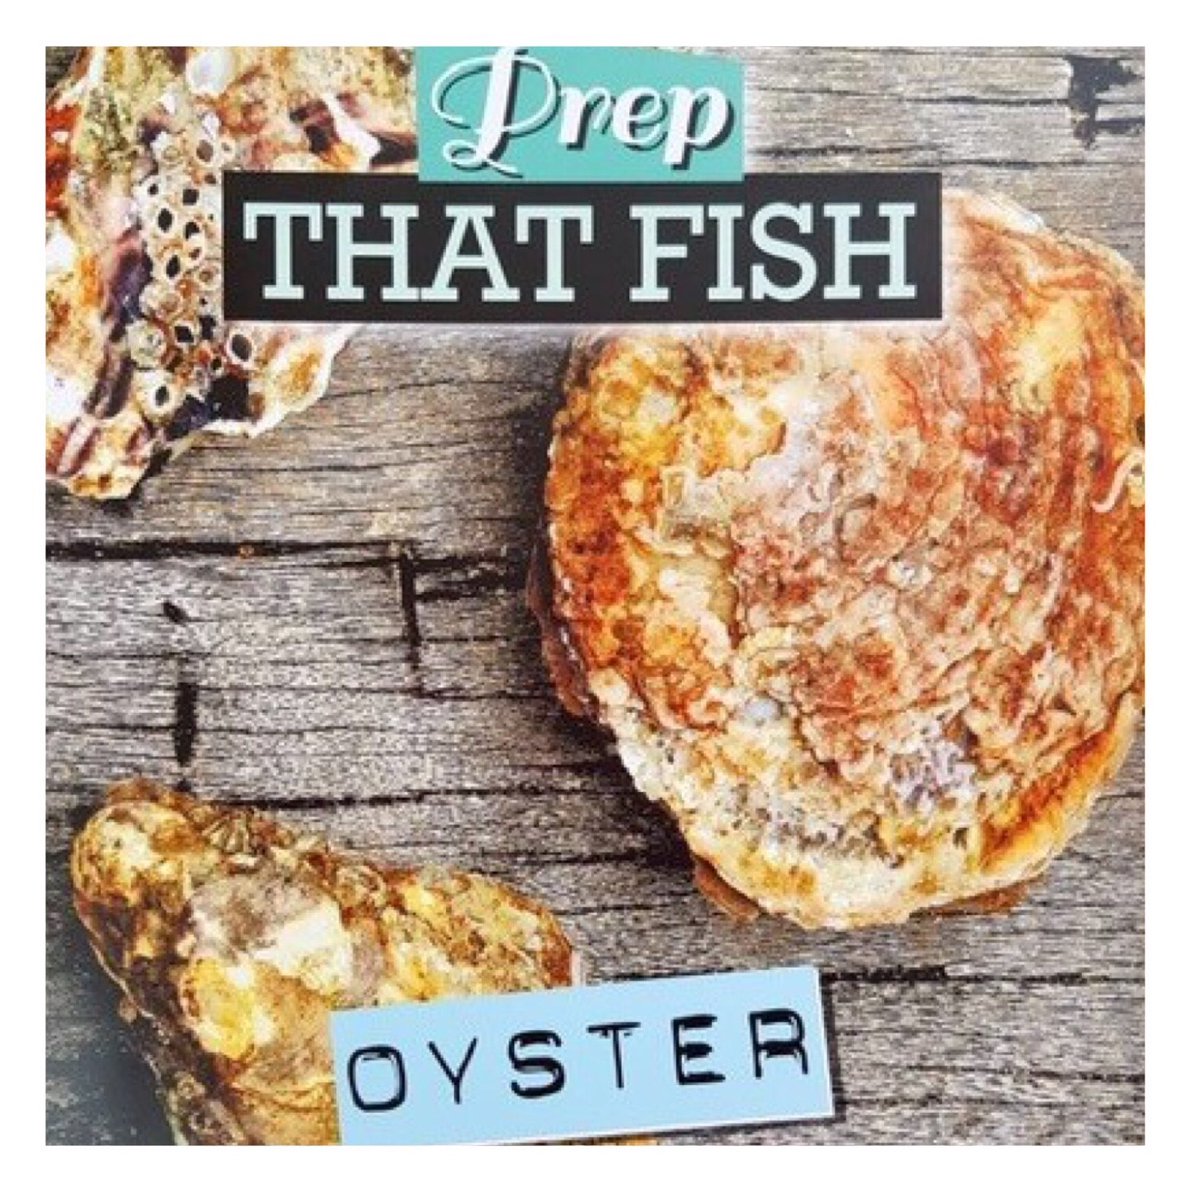 Xmas shopping?
For the cook / chef in your life - my #oyster and #crab books would make a perfect present!
Crab - £10
Oyster - 315
Both available from my website:
prepthatfish.co.uk/books/
#xmasgiftguide #kentshellfishlady #shellfish #loveseafood